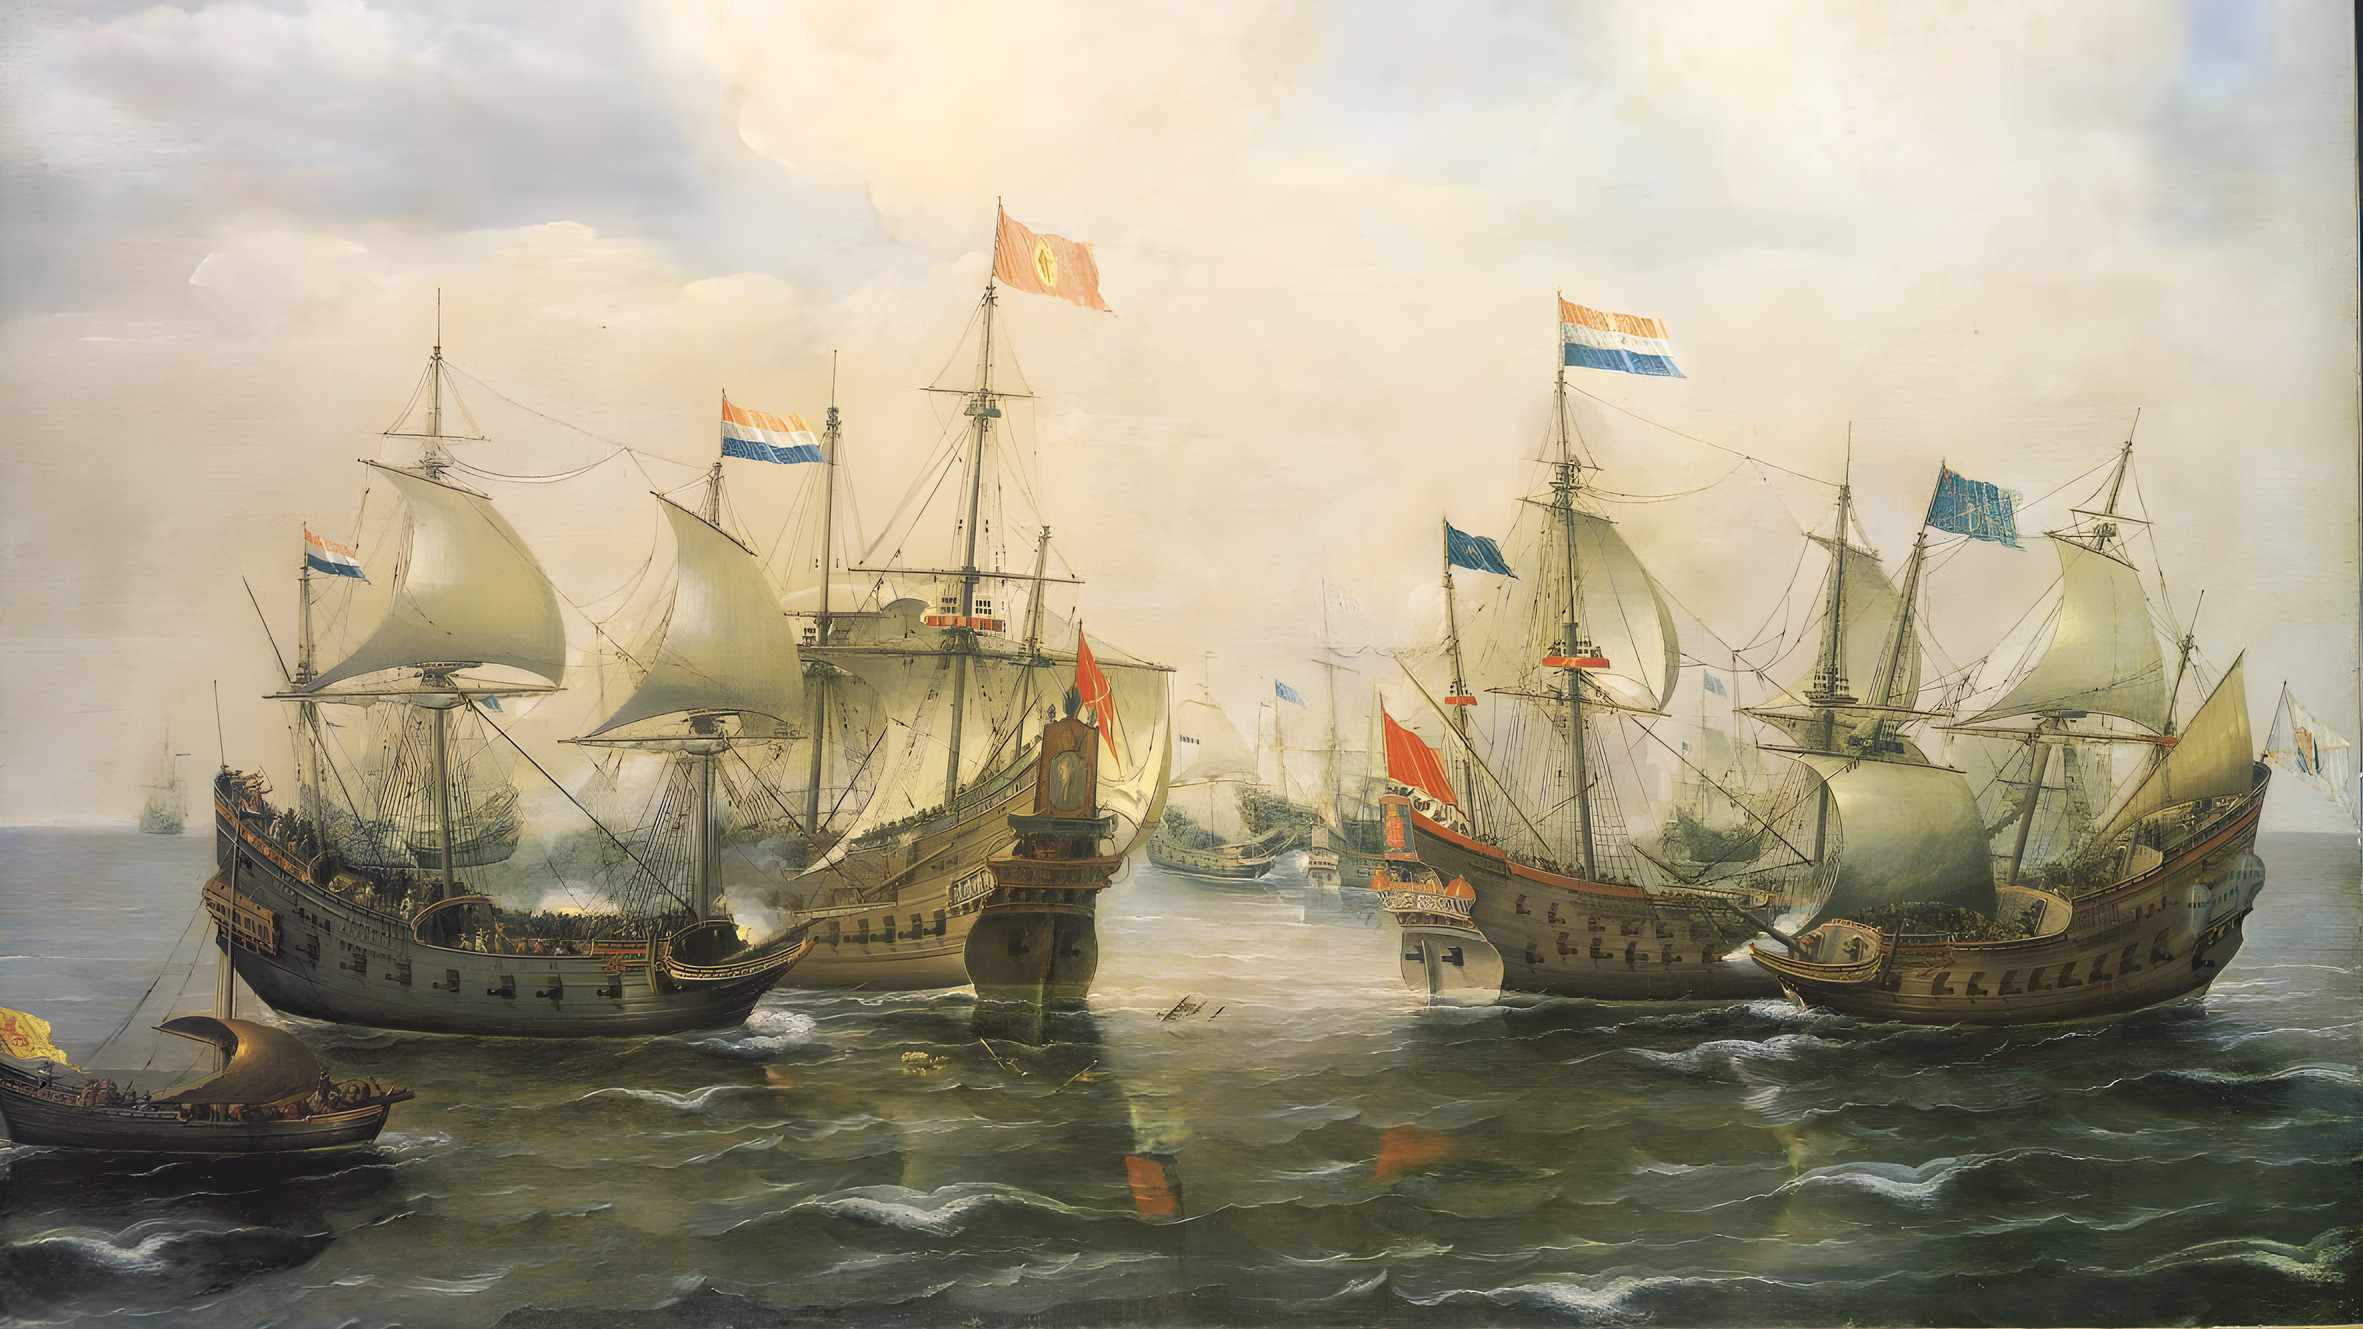 Weaker in many ways, but passionate for their independence, the Dutch pounce on a Spanish fleet even under the protective British guns at Dover.